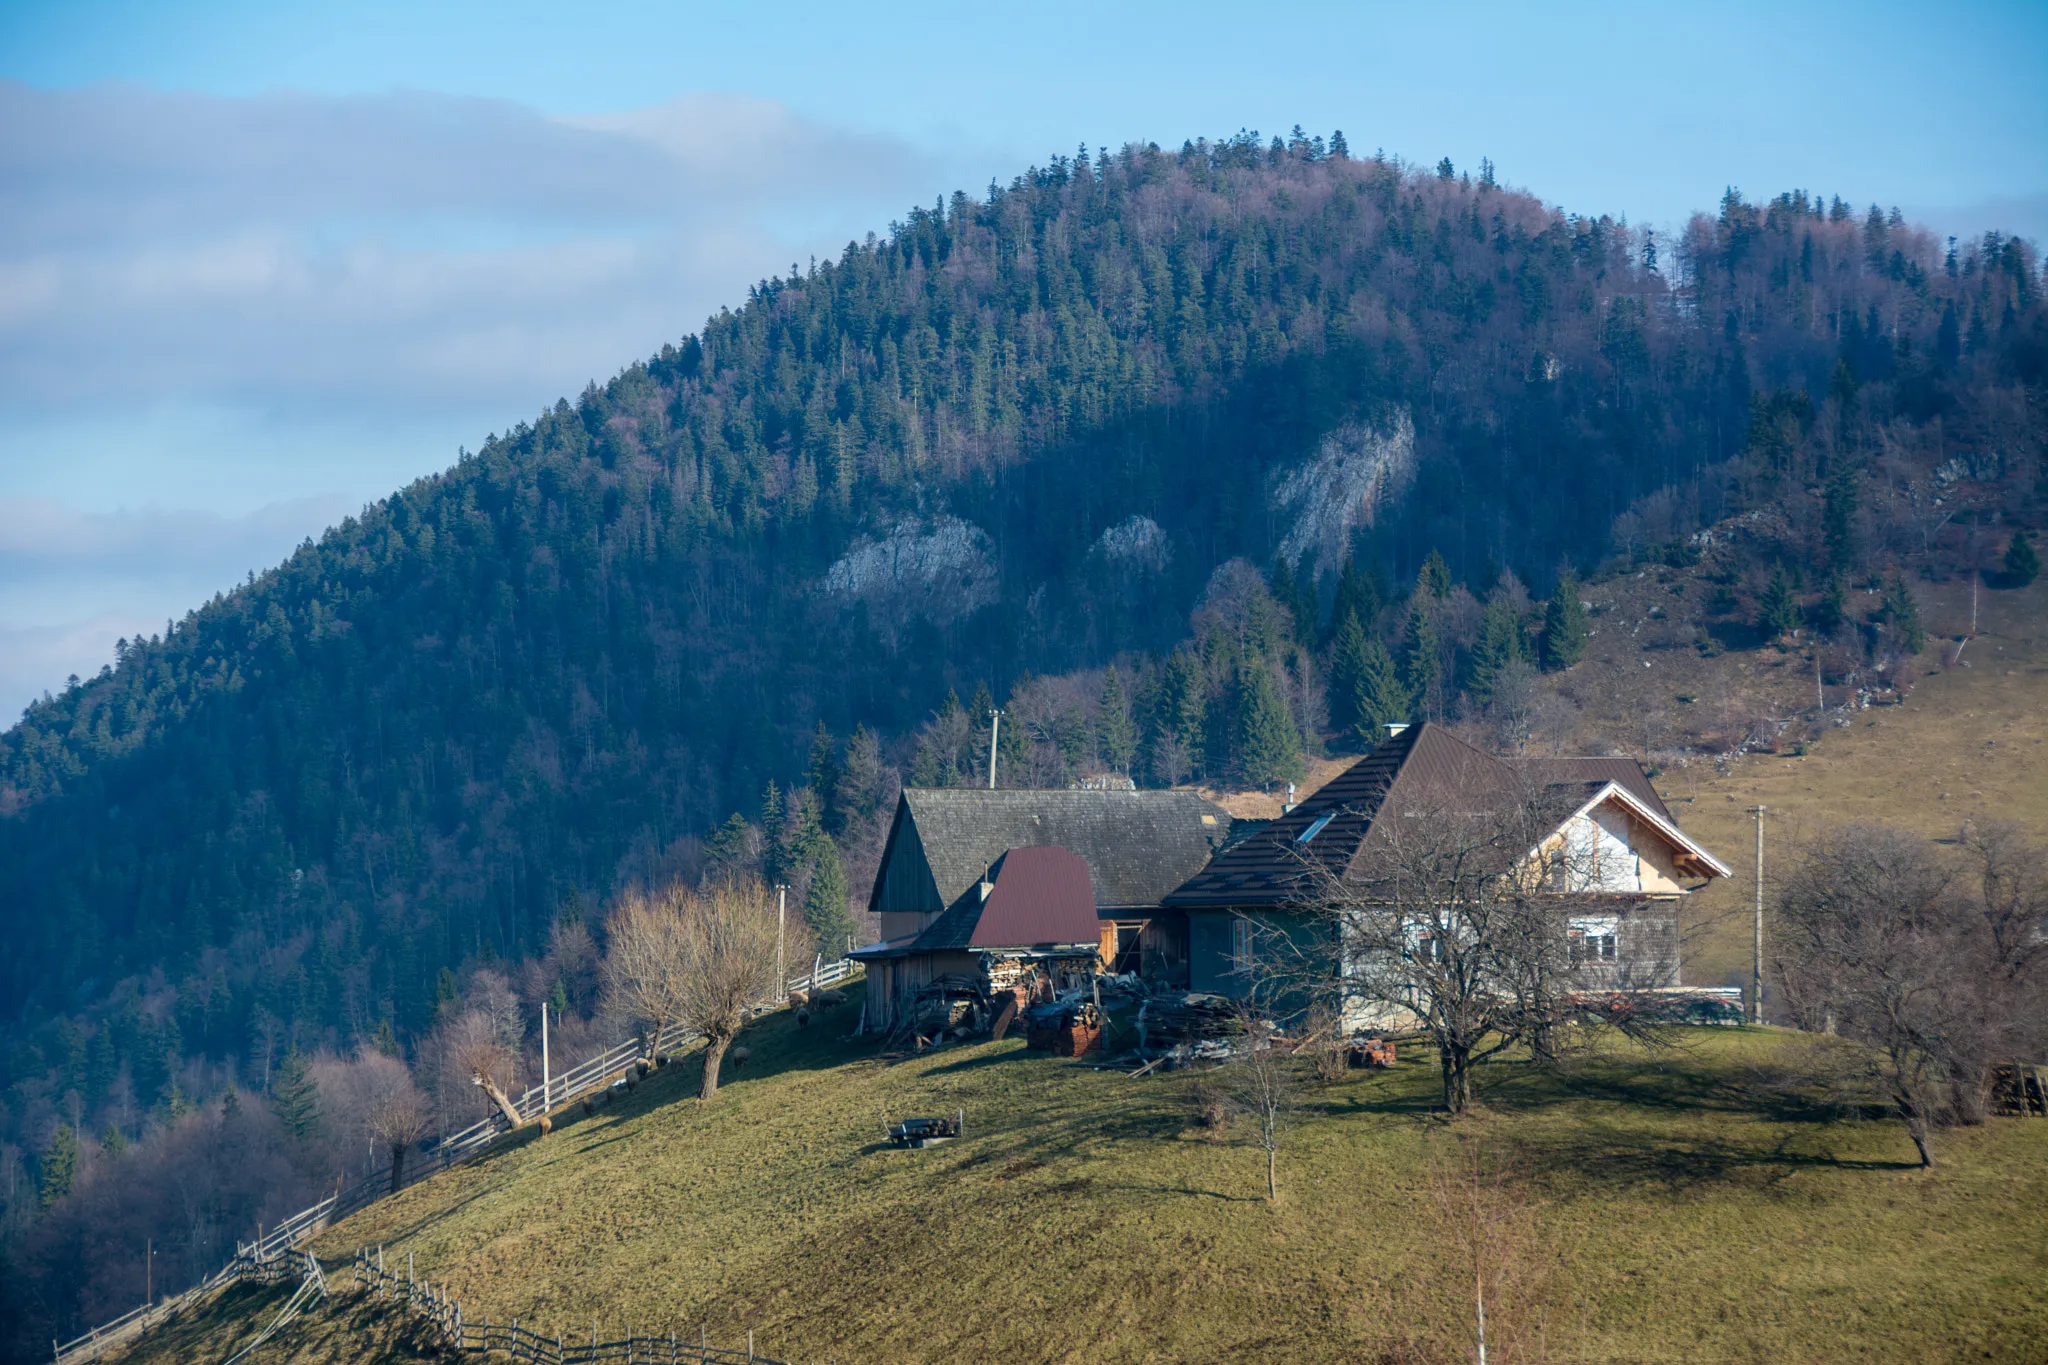 Photo showing: 500px provided description: A really cool place to go to for some downtime and recharge. [#forest ,#mountains ,#house ,#outdoor ,#green ,#hills ,#rural ,#outdoors ,#Brasov ,#Romania]